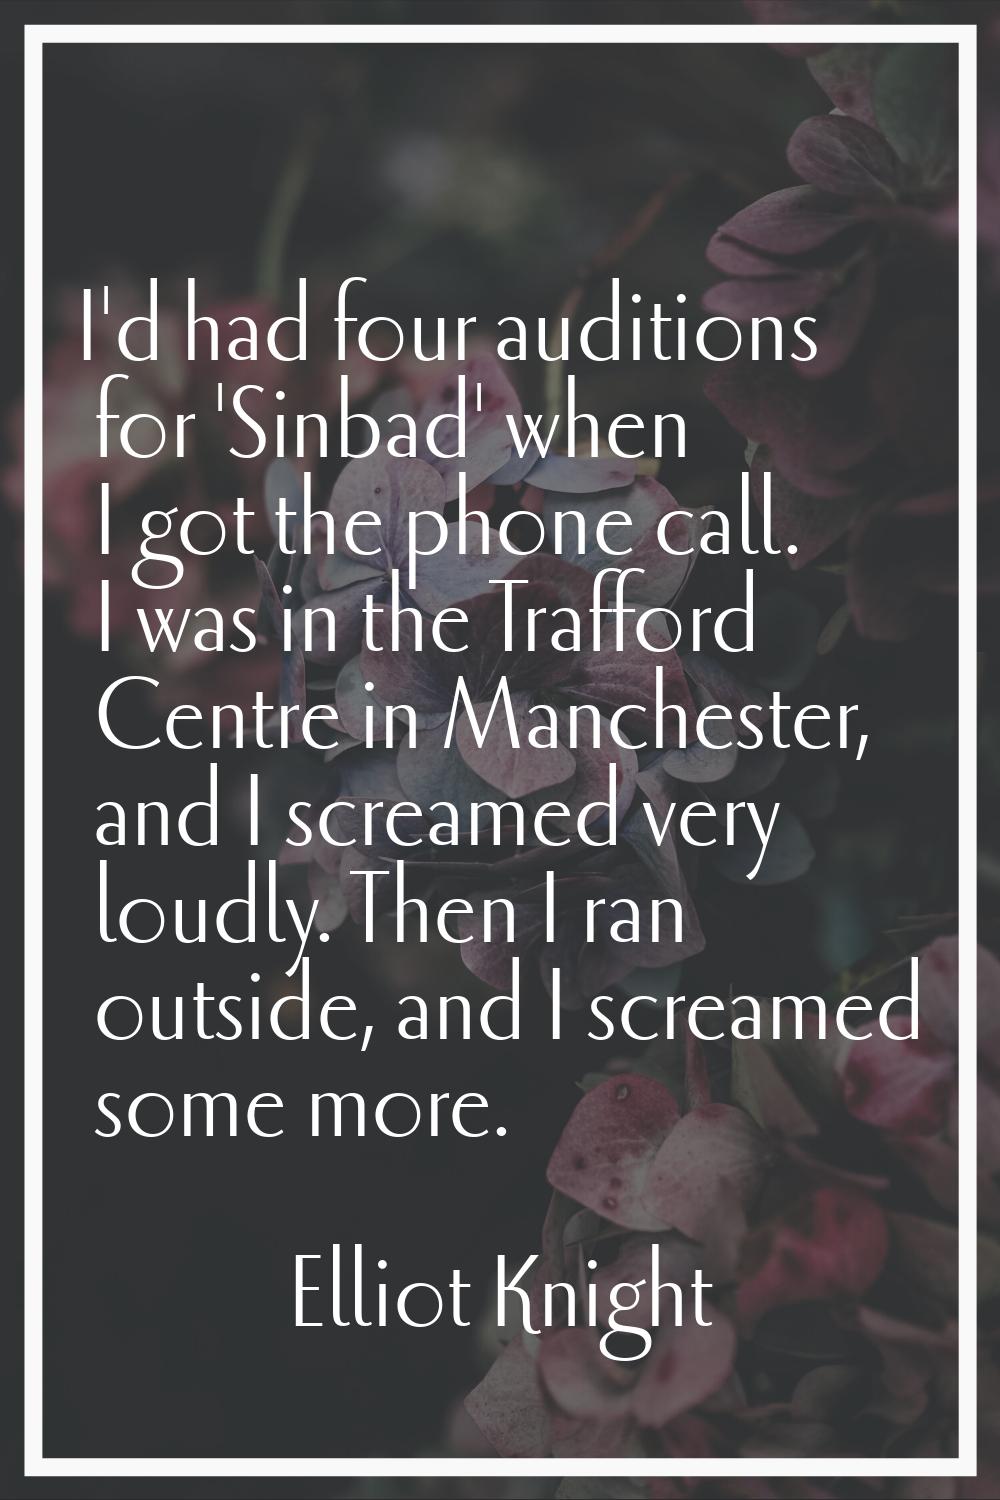 I'd had four auditions for 'Sinbad' when I got the phone call. I was in the Trafford Centre in Manc